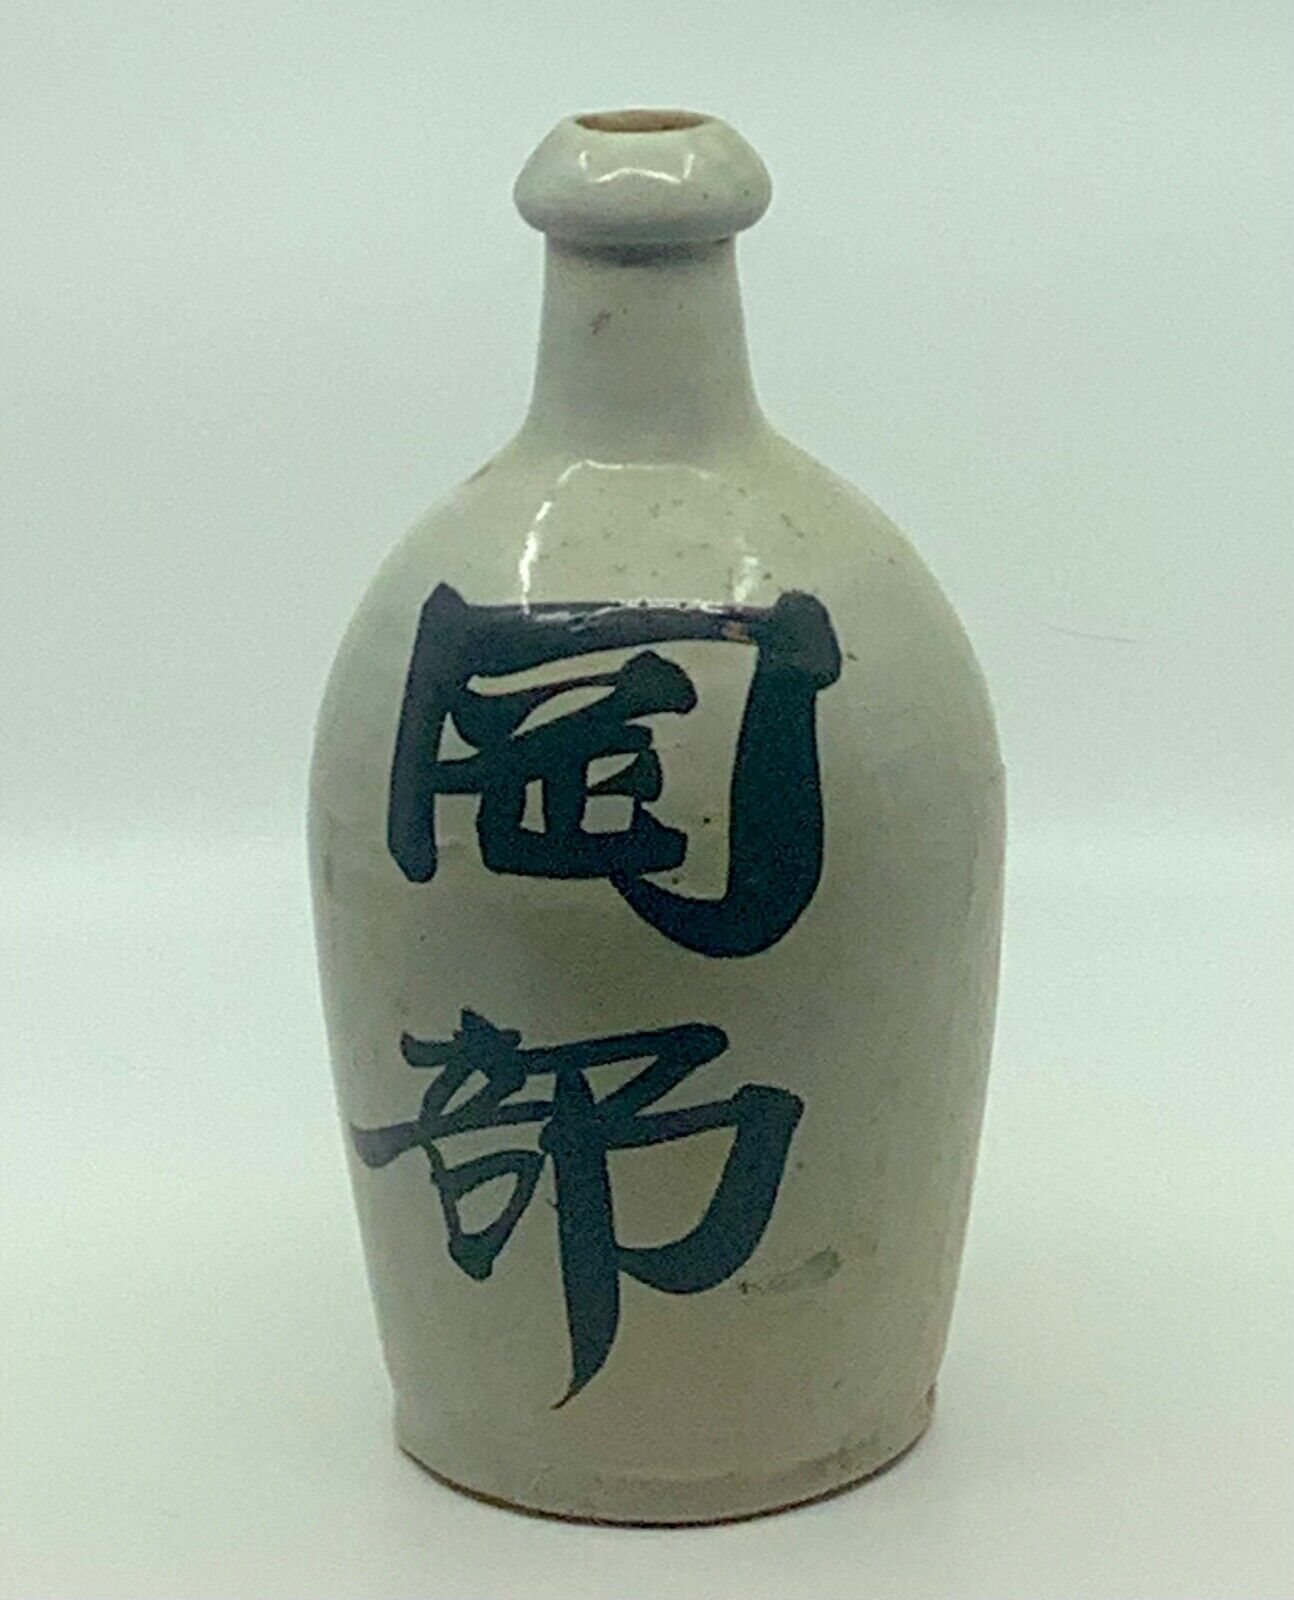 Authentic Vintage Sake Bottle from Japan - Collectible